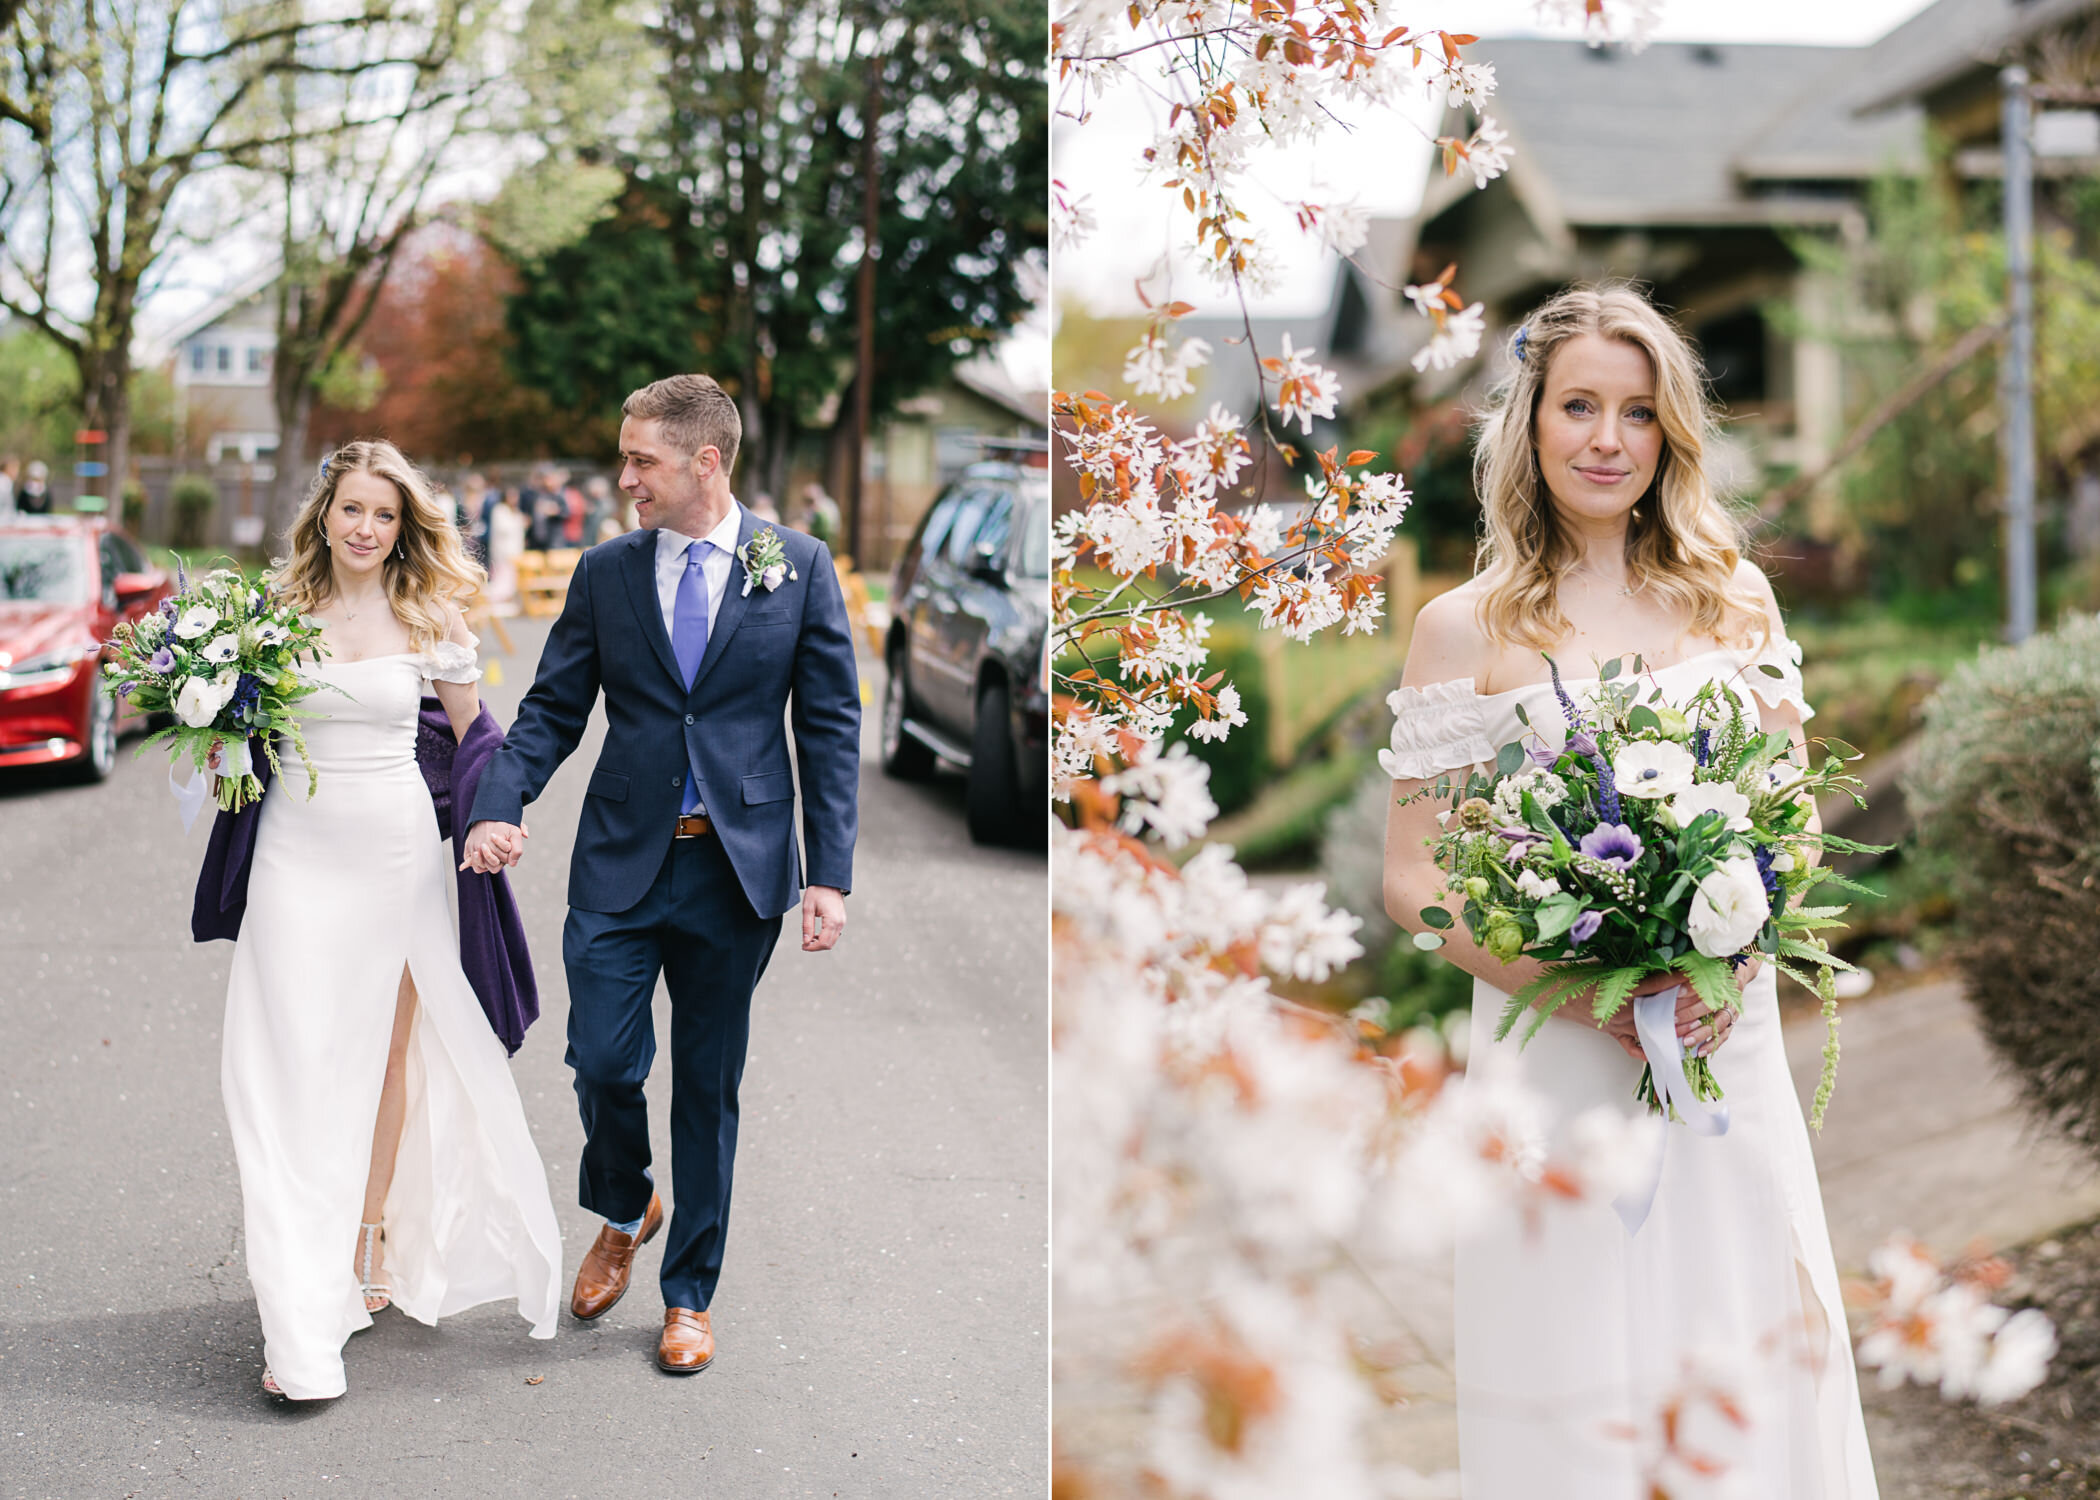  Bride with dress cut on leg and groom walk down portland street surrounded by white flowers 